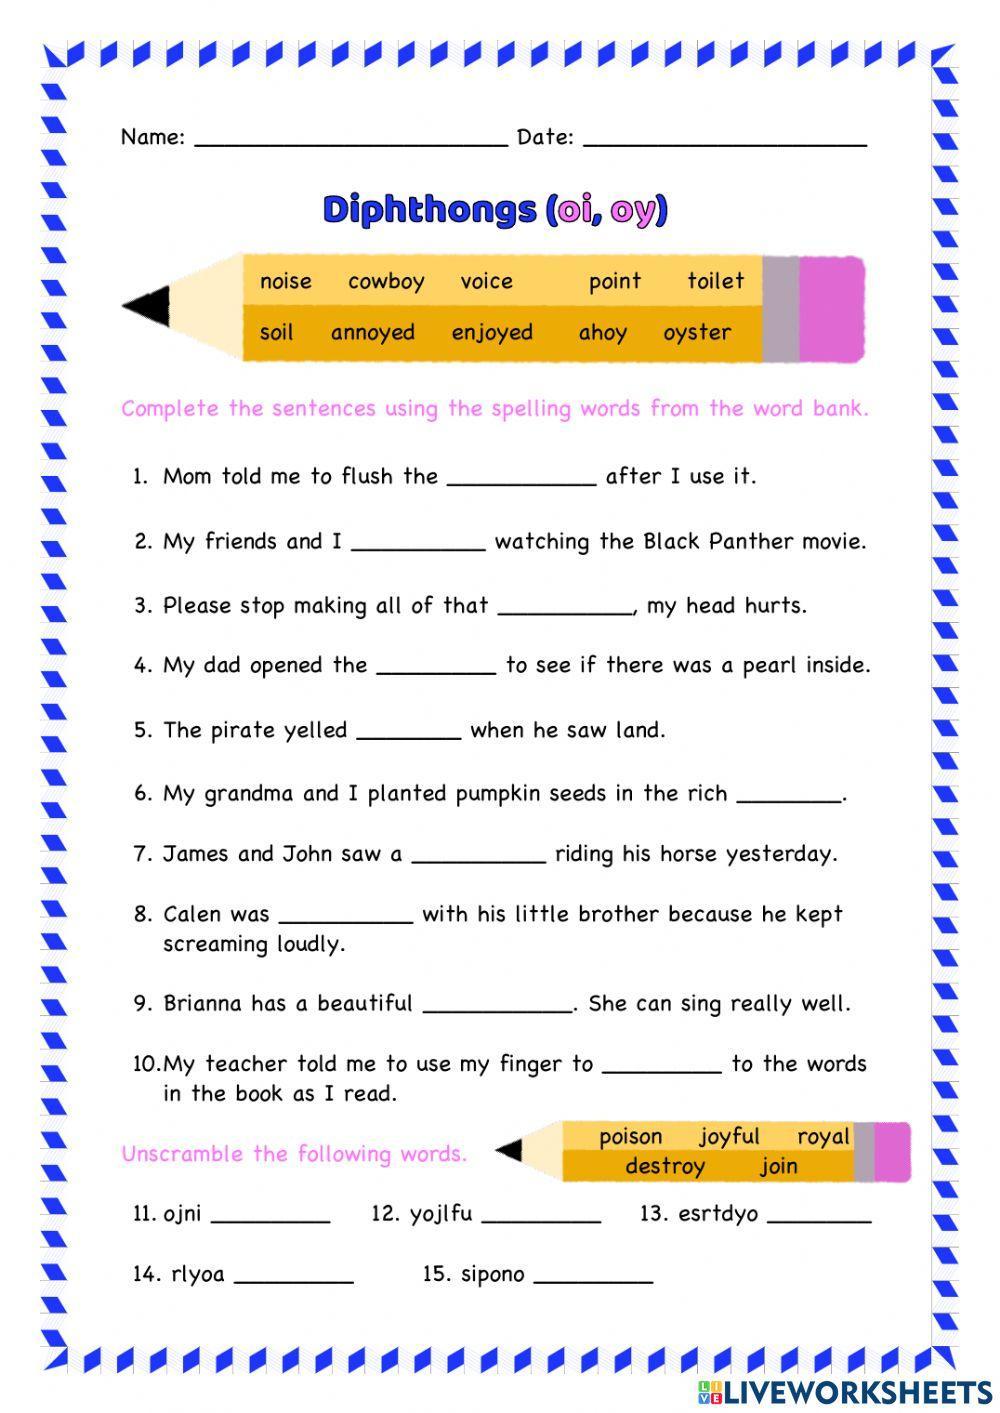 Diphthongs (oi and oy)